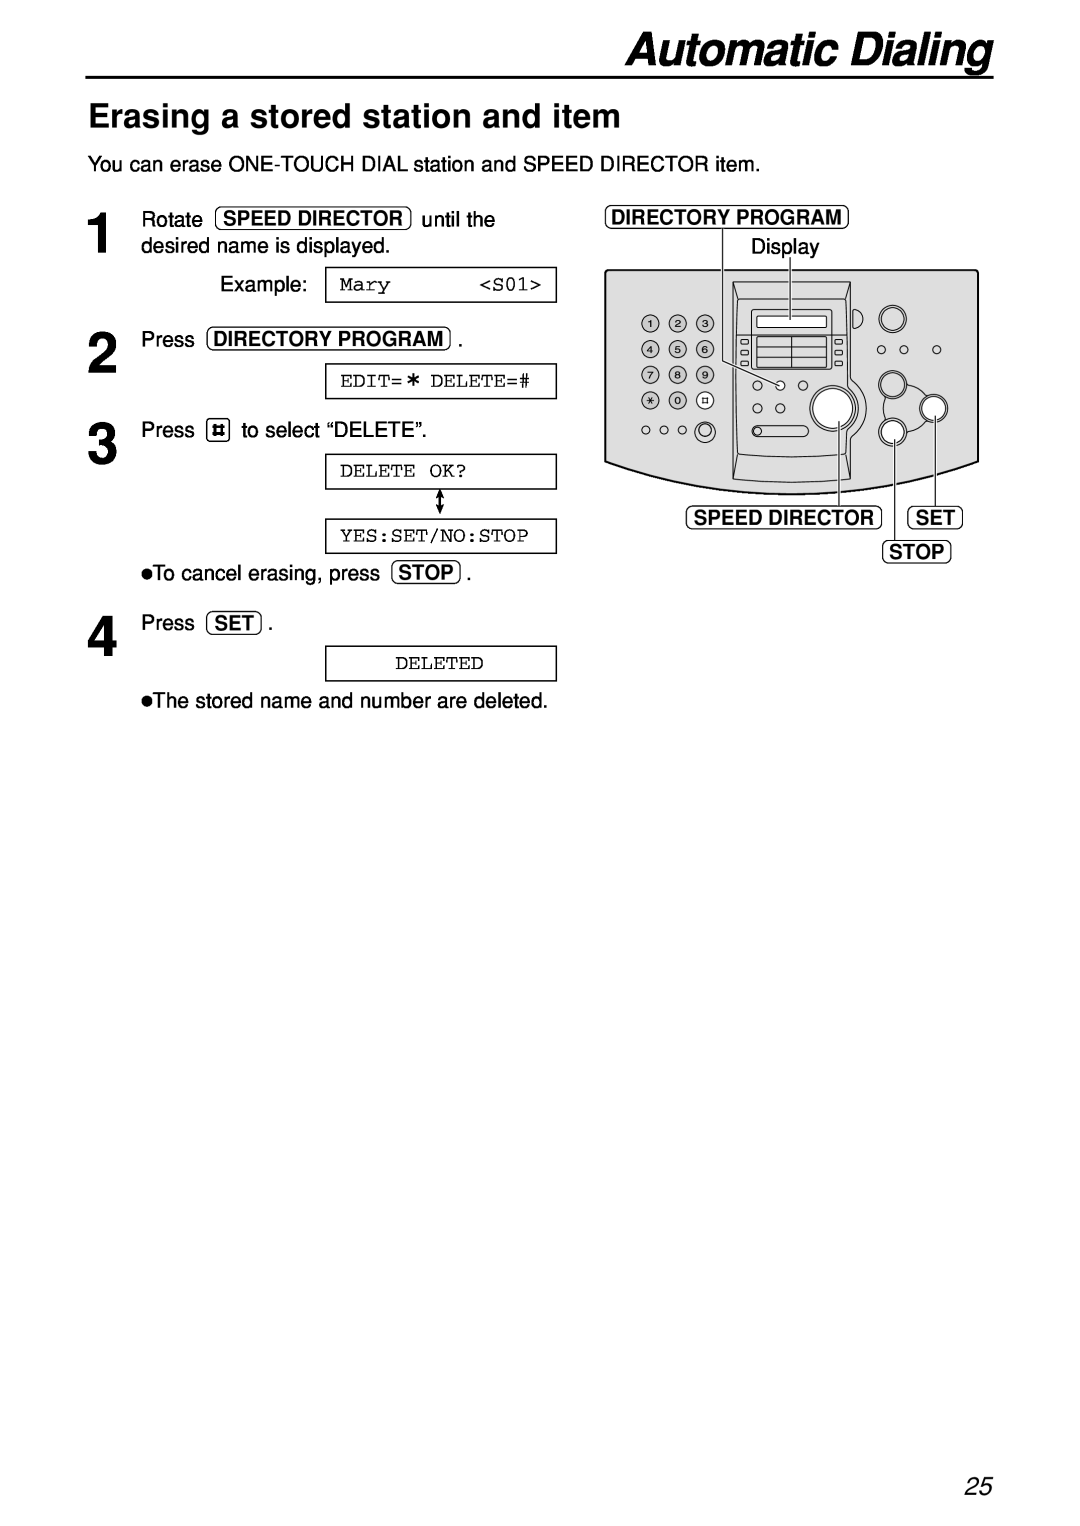 Panasonic KX-FL501C manual Erasing a stored station and item, Automatic Dialing 